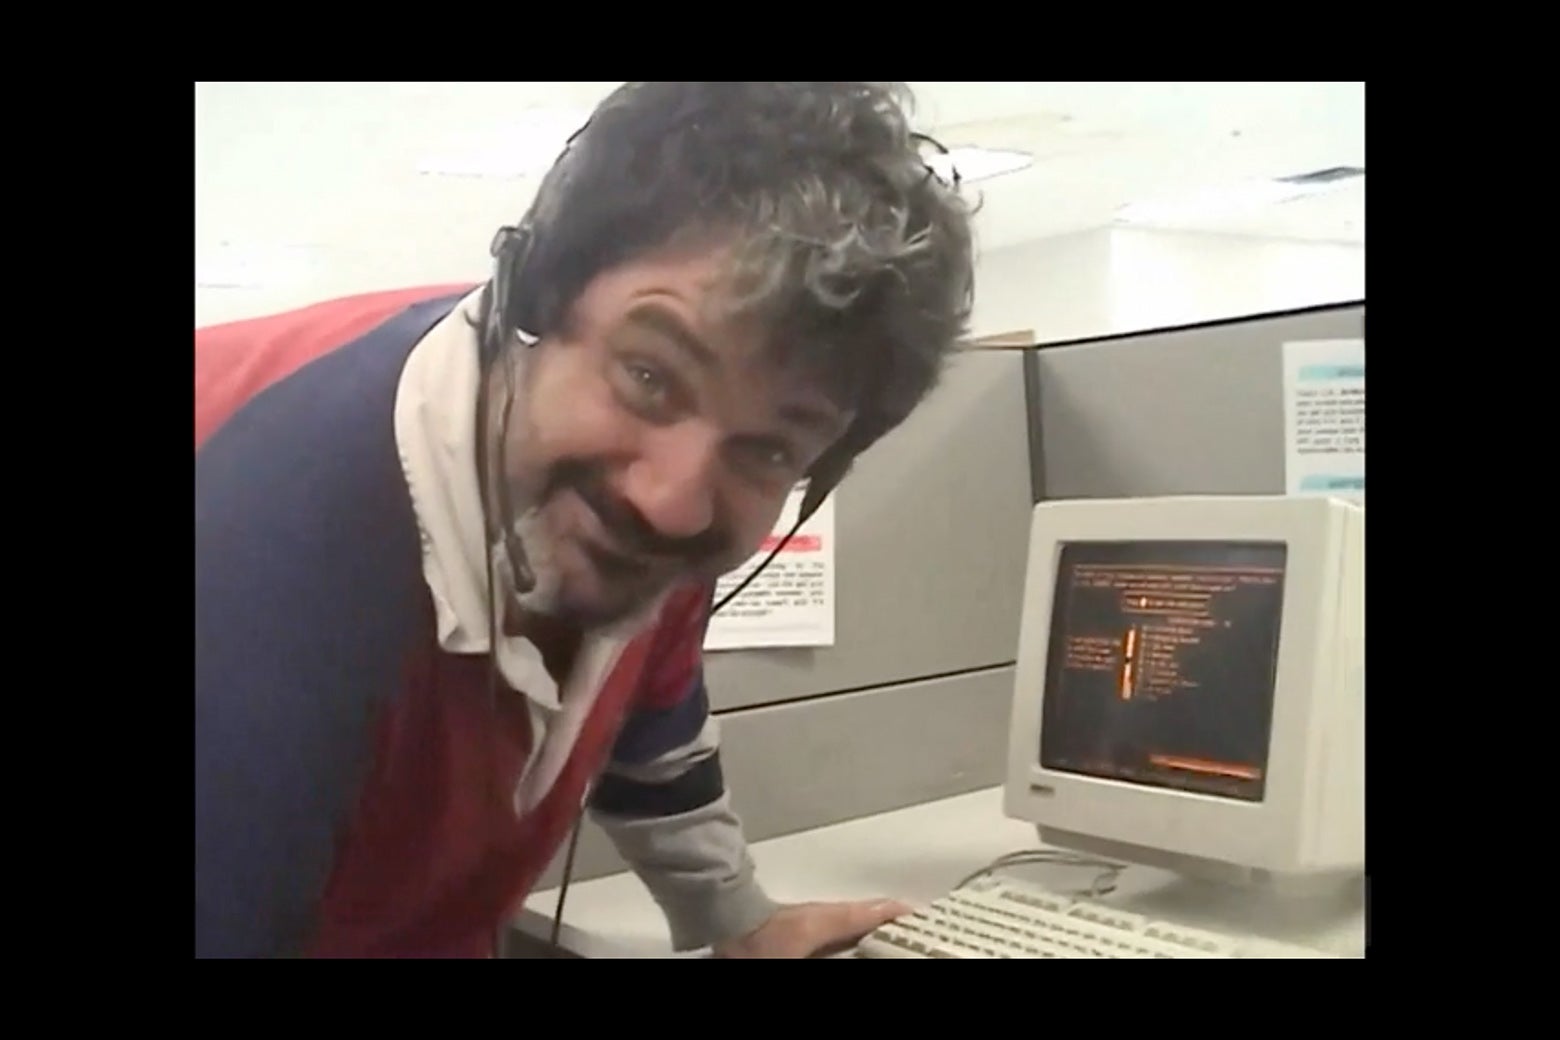 A man in a rumpled polo shirt, graying curly hair, and a beard, stoops in front of a very 1990s-looking computer, wearing a headset, making a sort of smirking expression into the camera as if to say, "Yeah, I know it's not great."